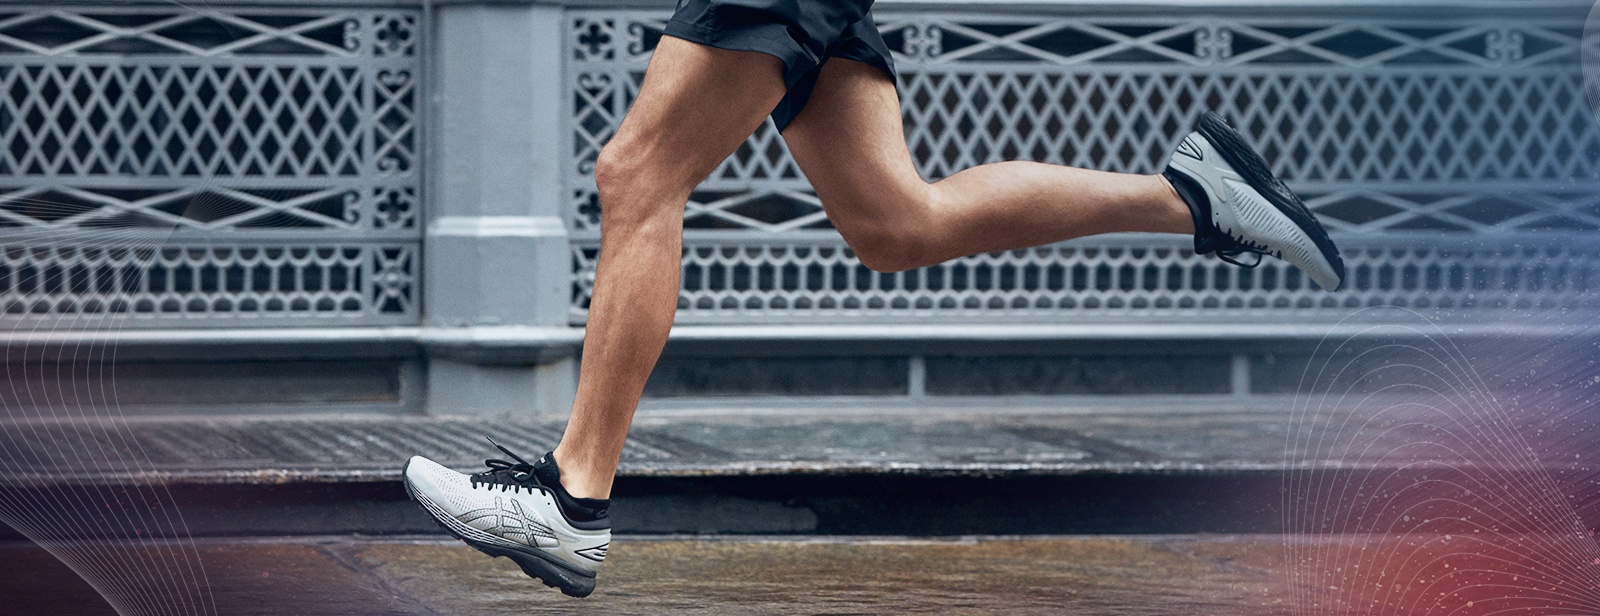 Closeup of the legs of a man running in shorts and white shoes.